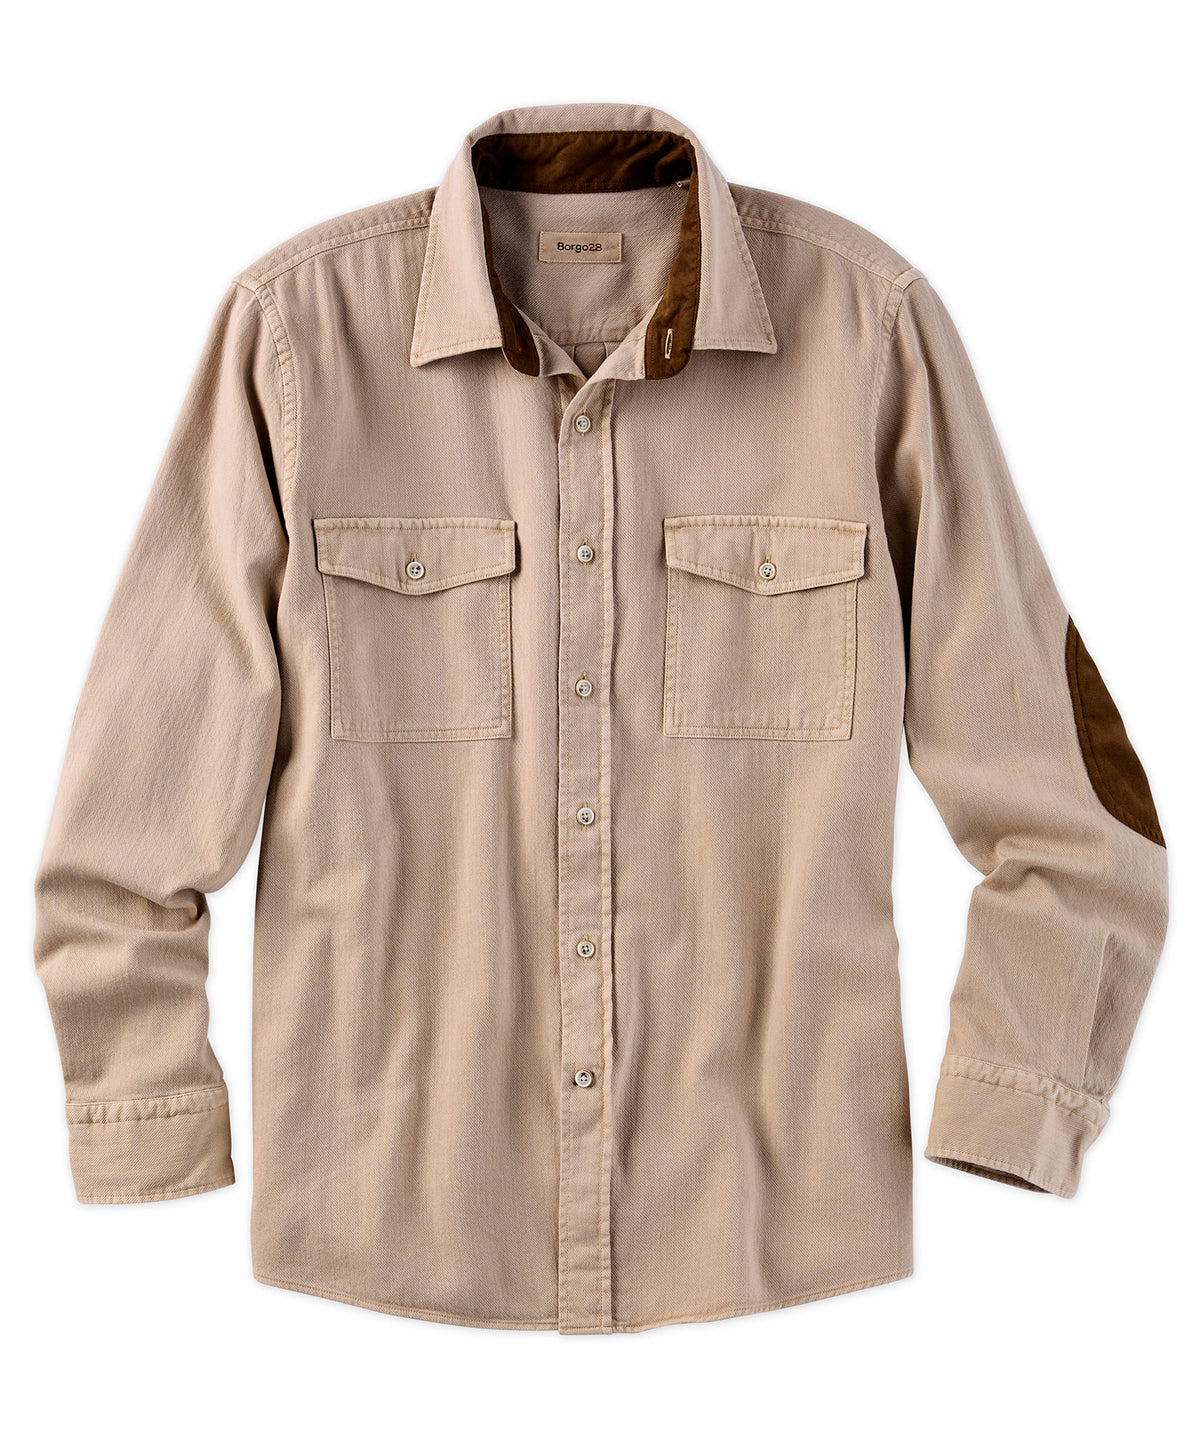 Safari Shirt with Elbow Patches